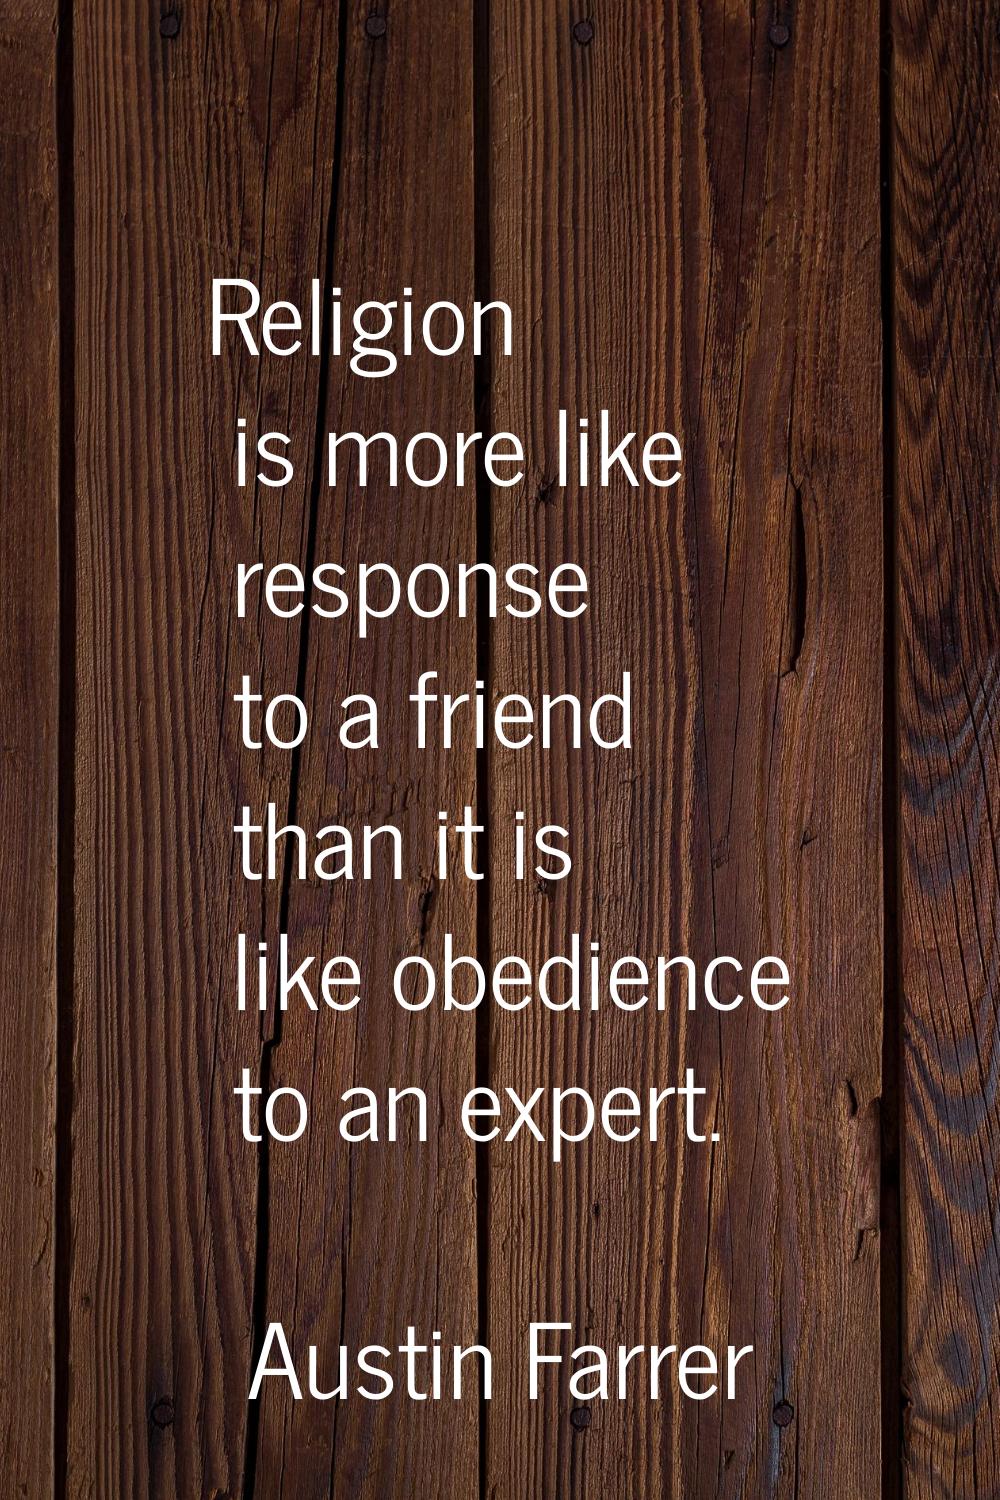 Religion is more like response to a friend than it is like obedience to an expert.